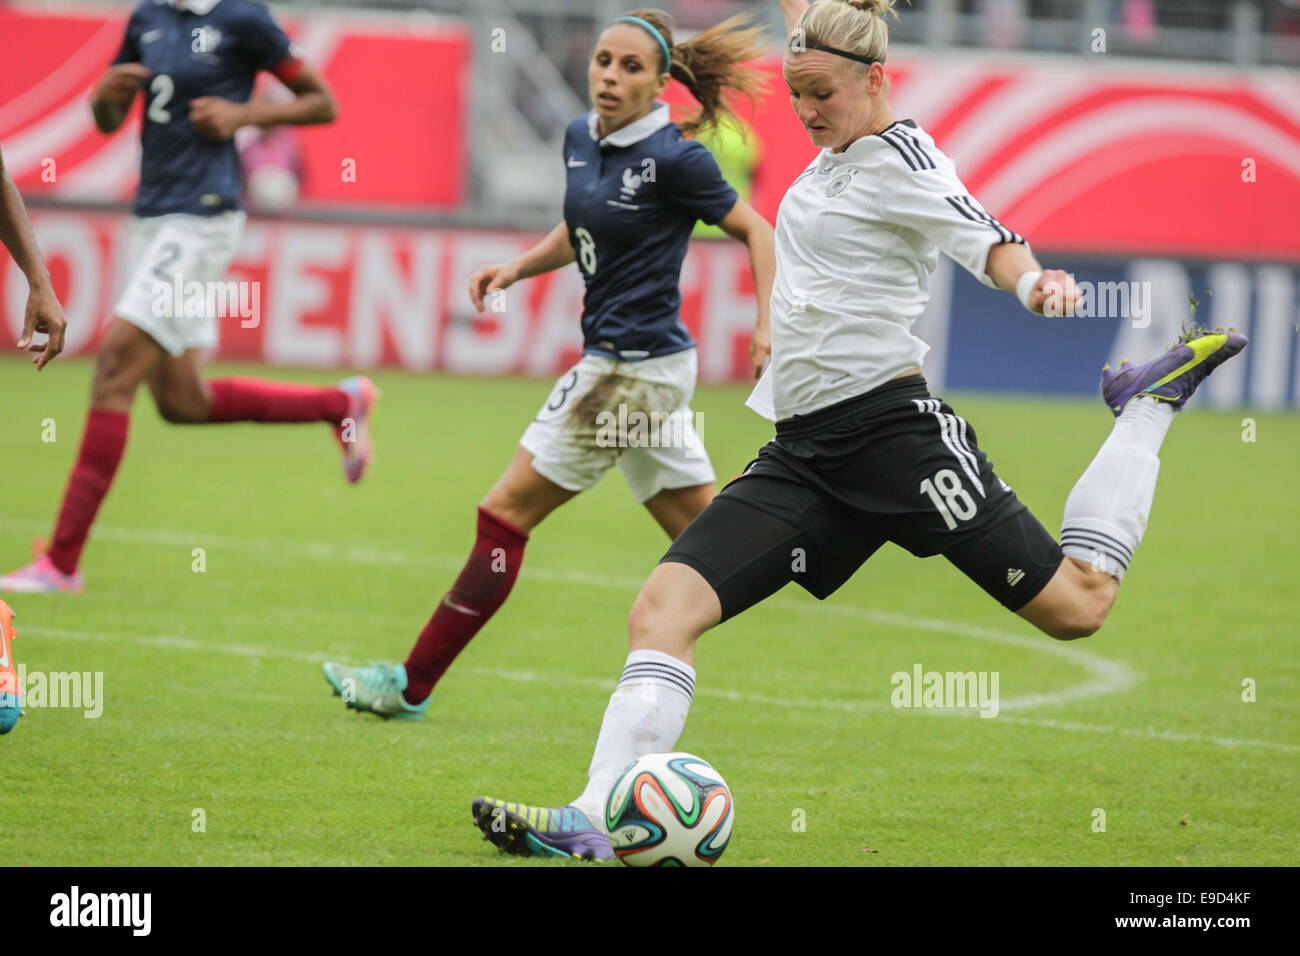 Offenbach, Germany. 25th Oct, 2014. Germany's Alexandra Popp in action during the women's soccer international match between Germany and France in Offenbach, Germany, 25 October 2014. Photo: FRANK RUMPENHORST/dpa/Alamy Live News Stock Photo